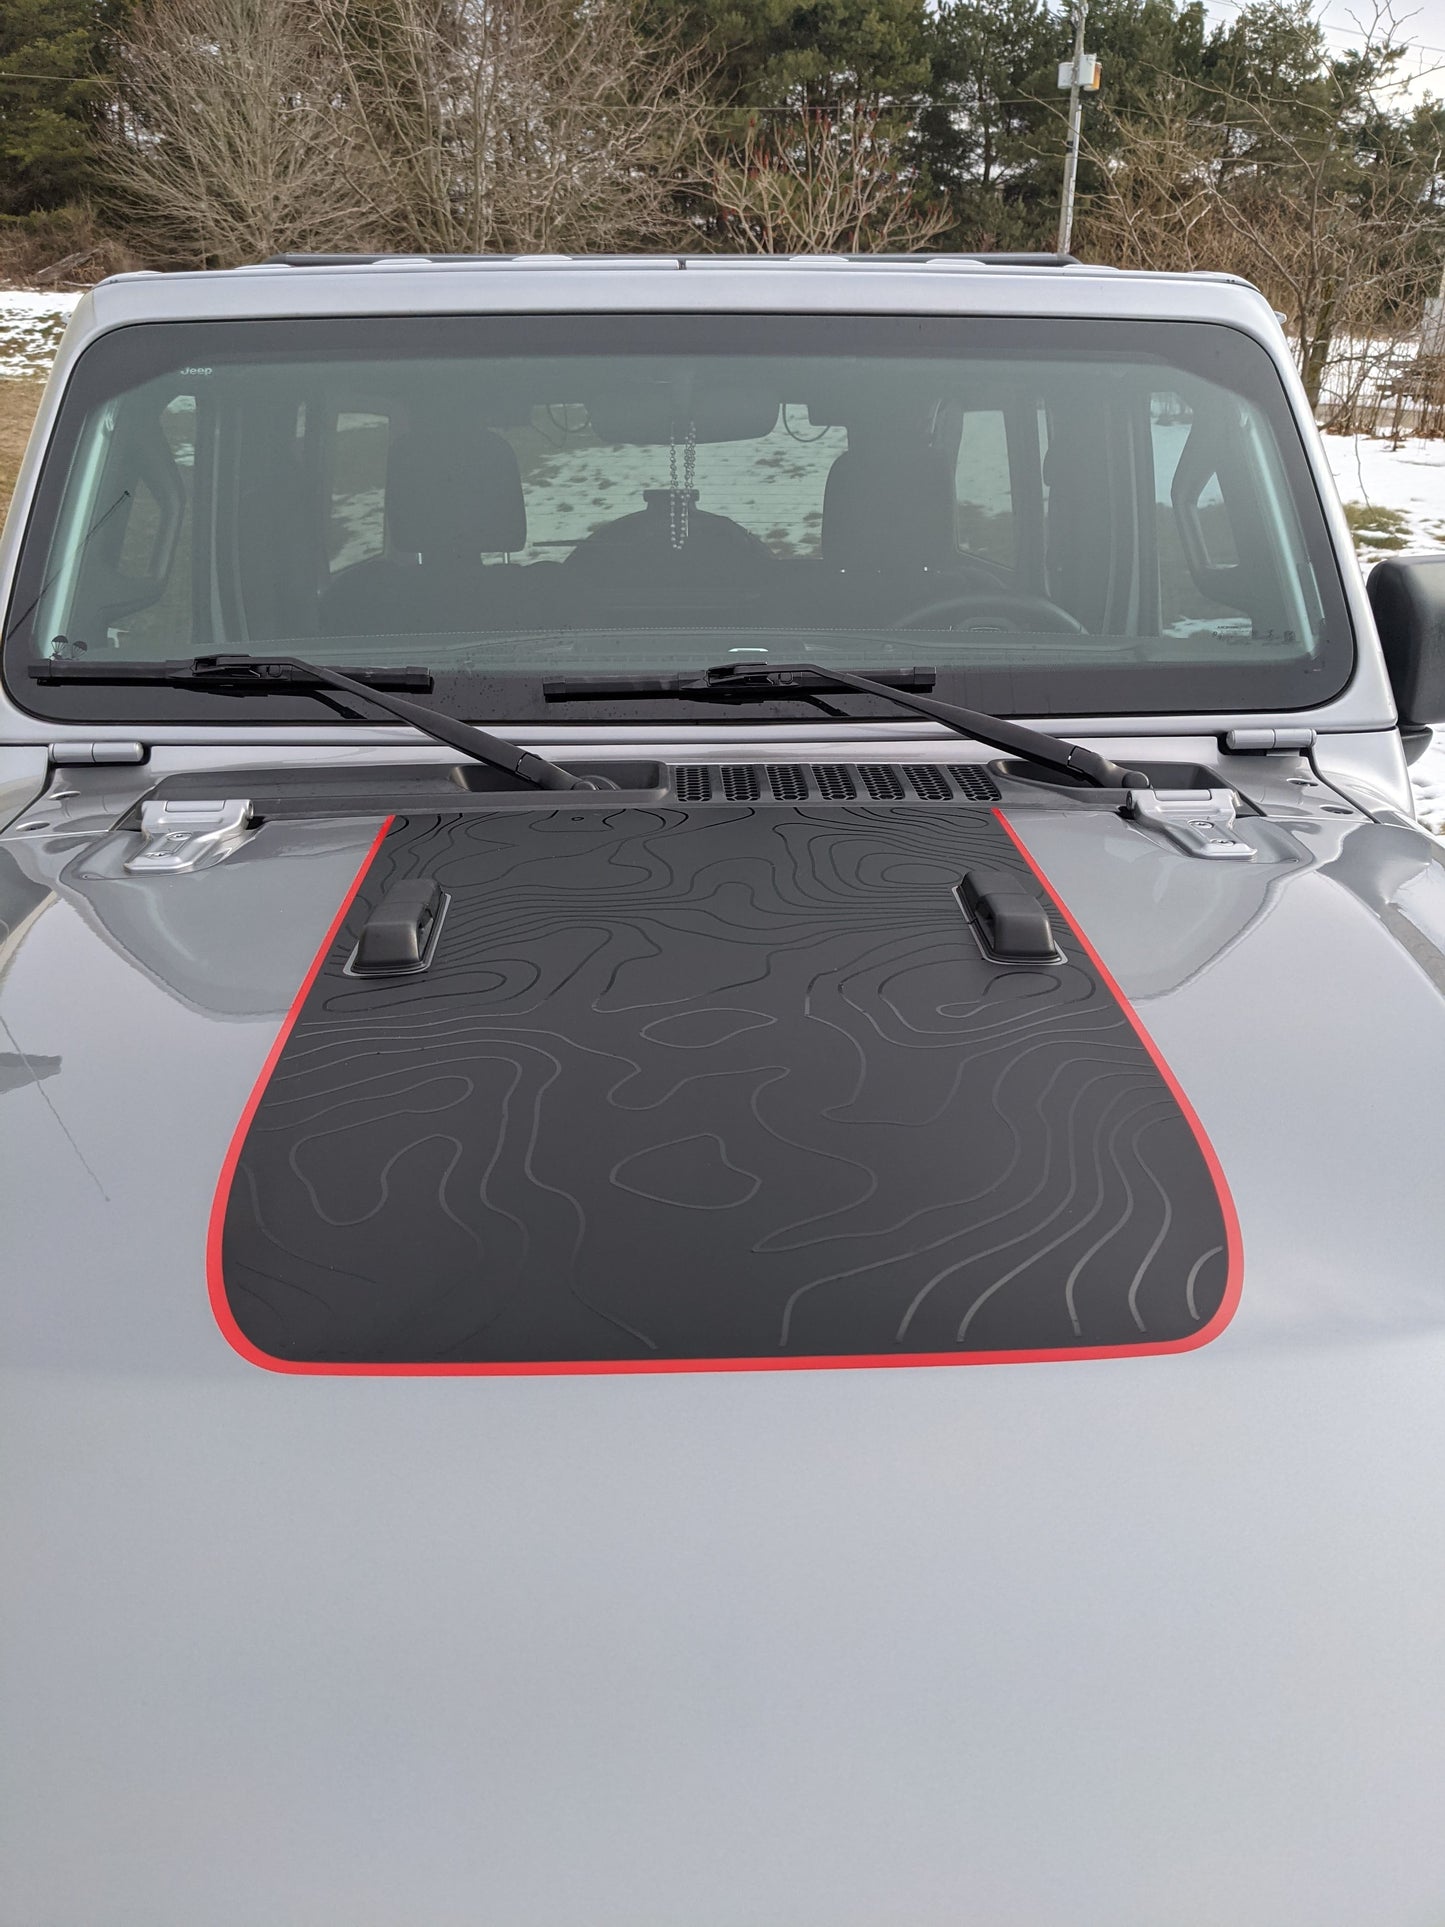 Topographical Red Line Rubicon Blackout Hood Decal- Fits Jeep Wrangler & Gladiator JL Hood Decal (3 Pieces)